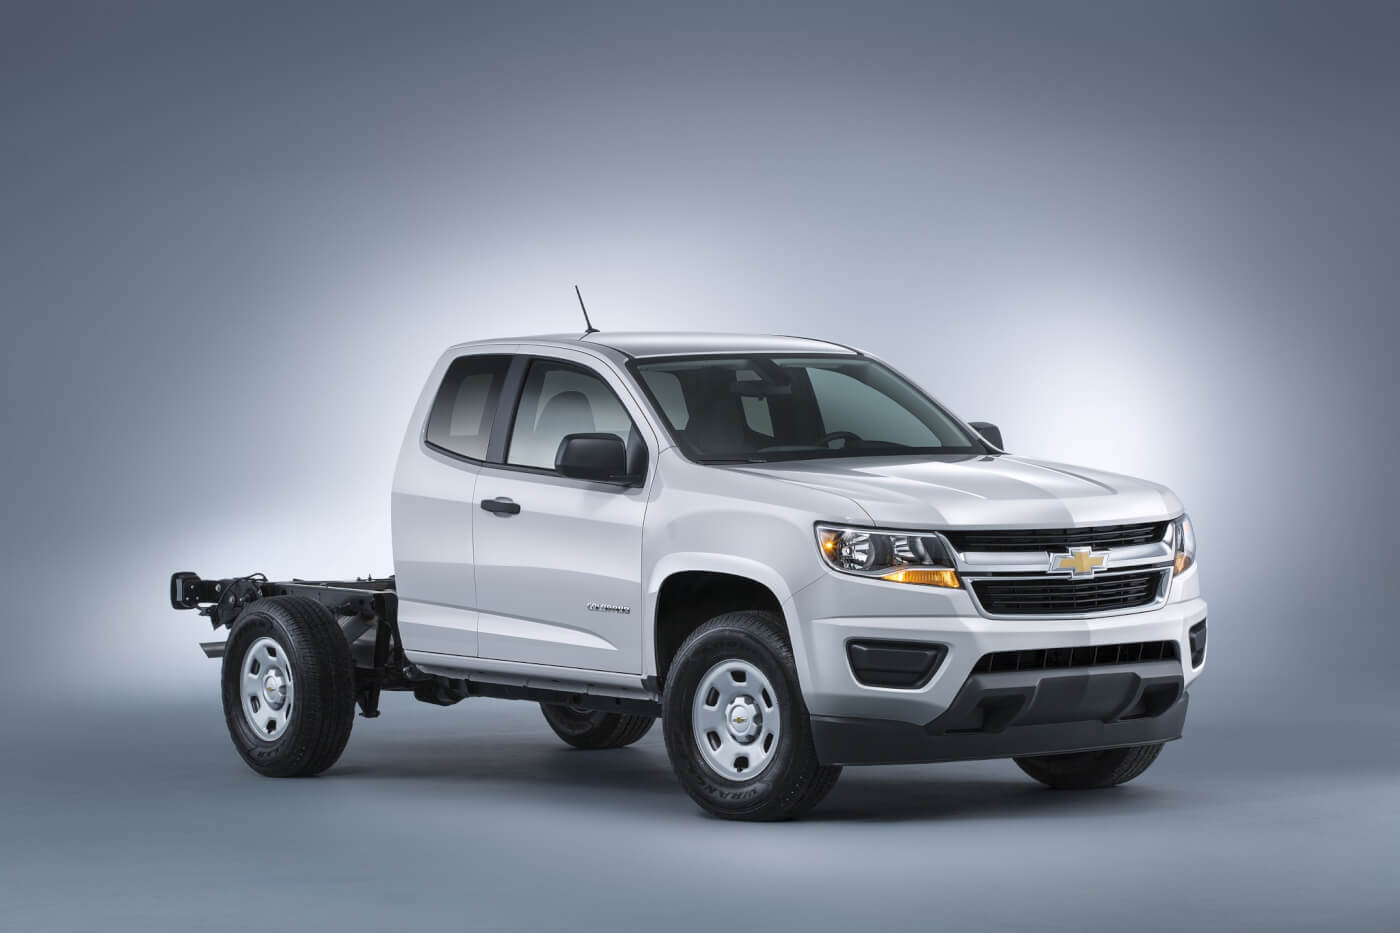 Business owners and fleet managers have a new choice for custom body upfits with the 2015 Chevrolet Colorado box delete package – the only one offered in the midsize truck segment.